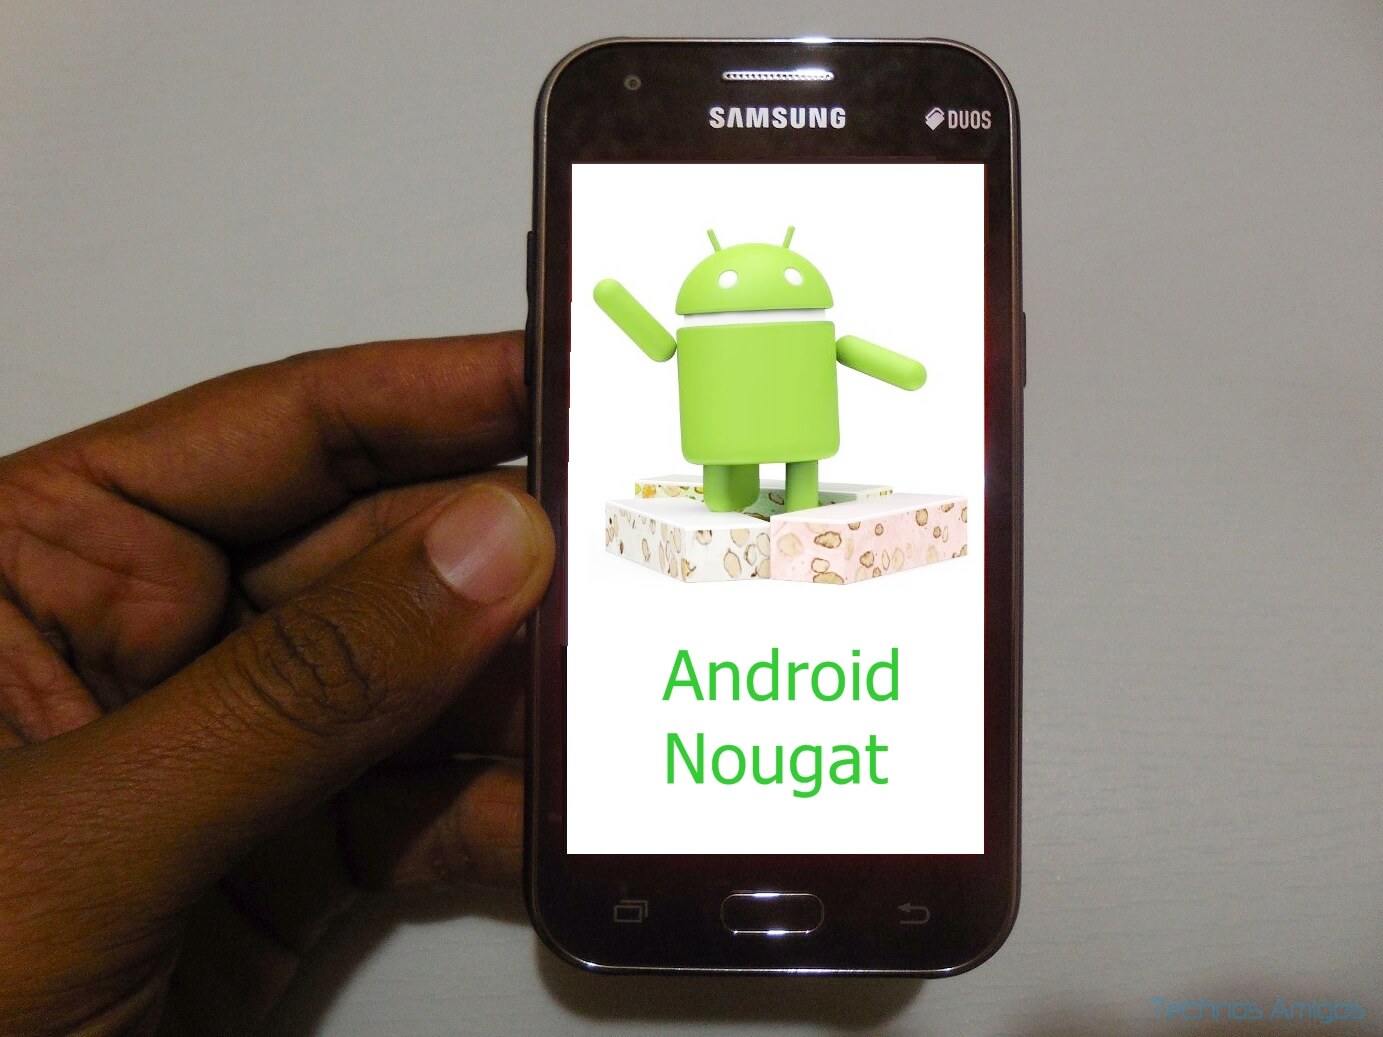 Samsung Android Nougat Update